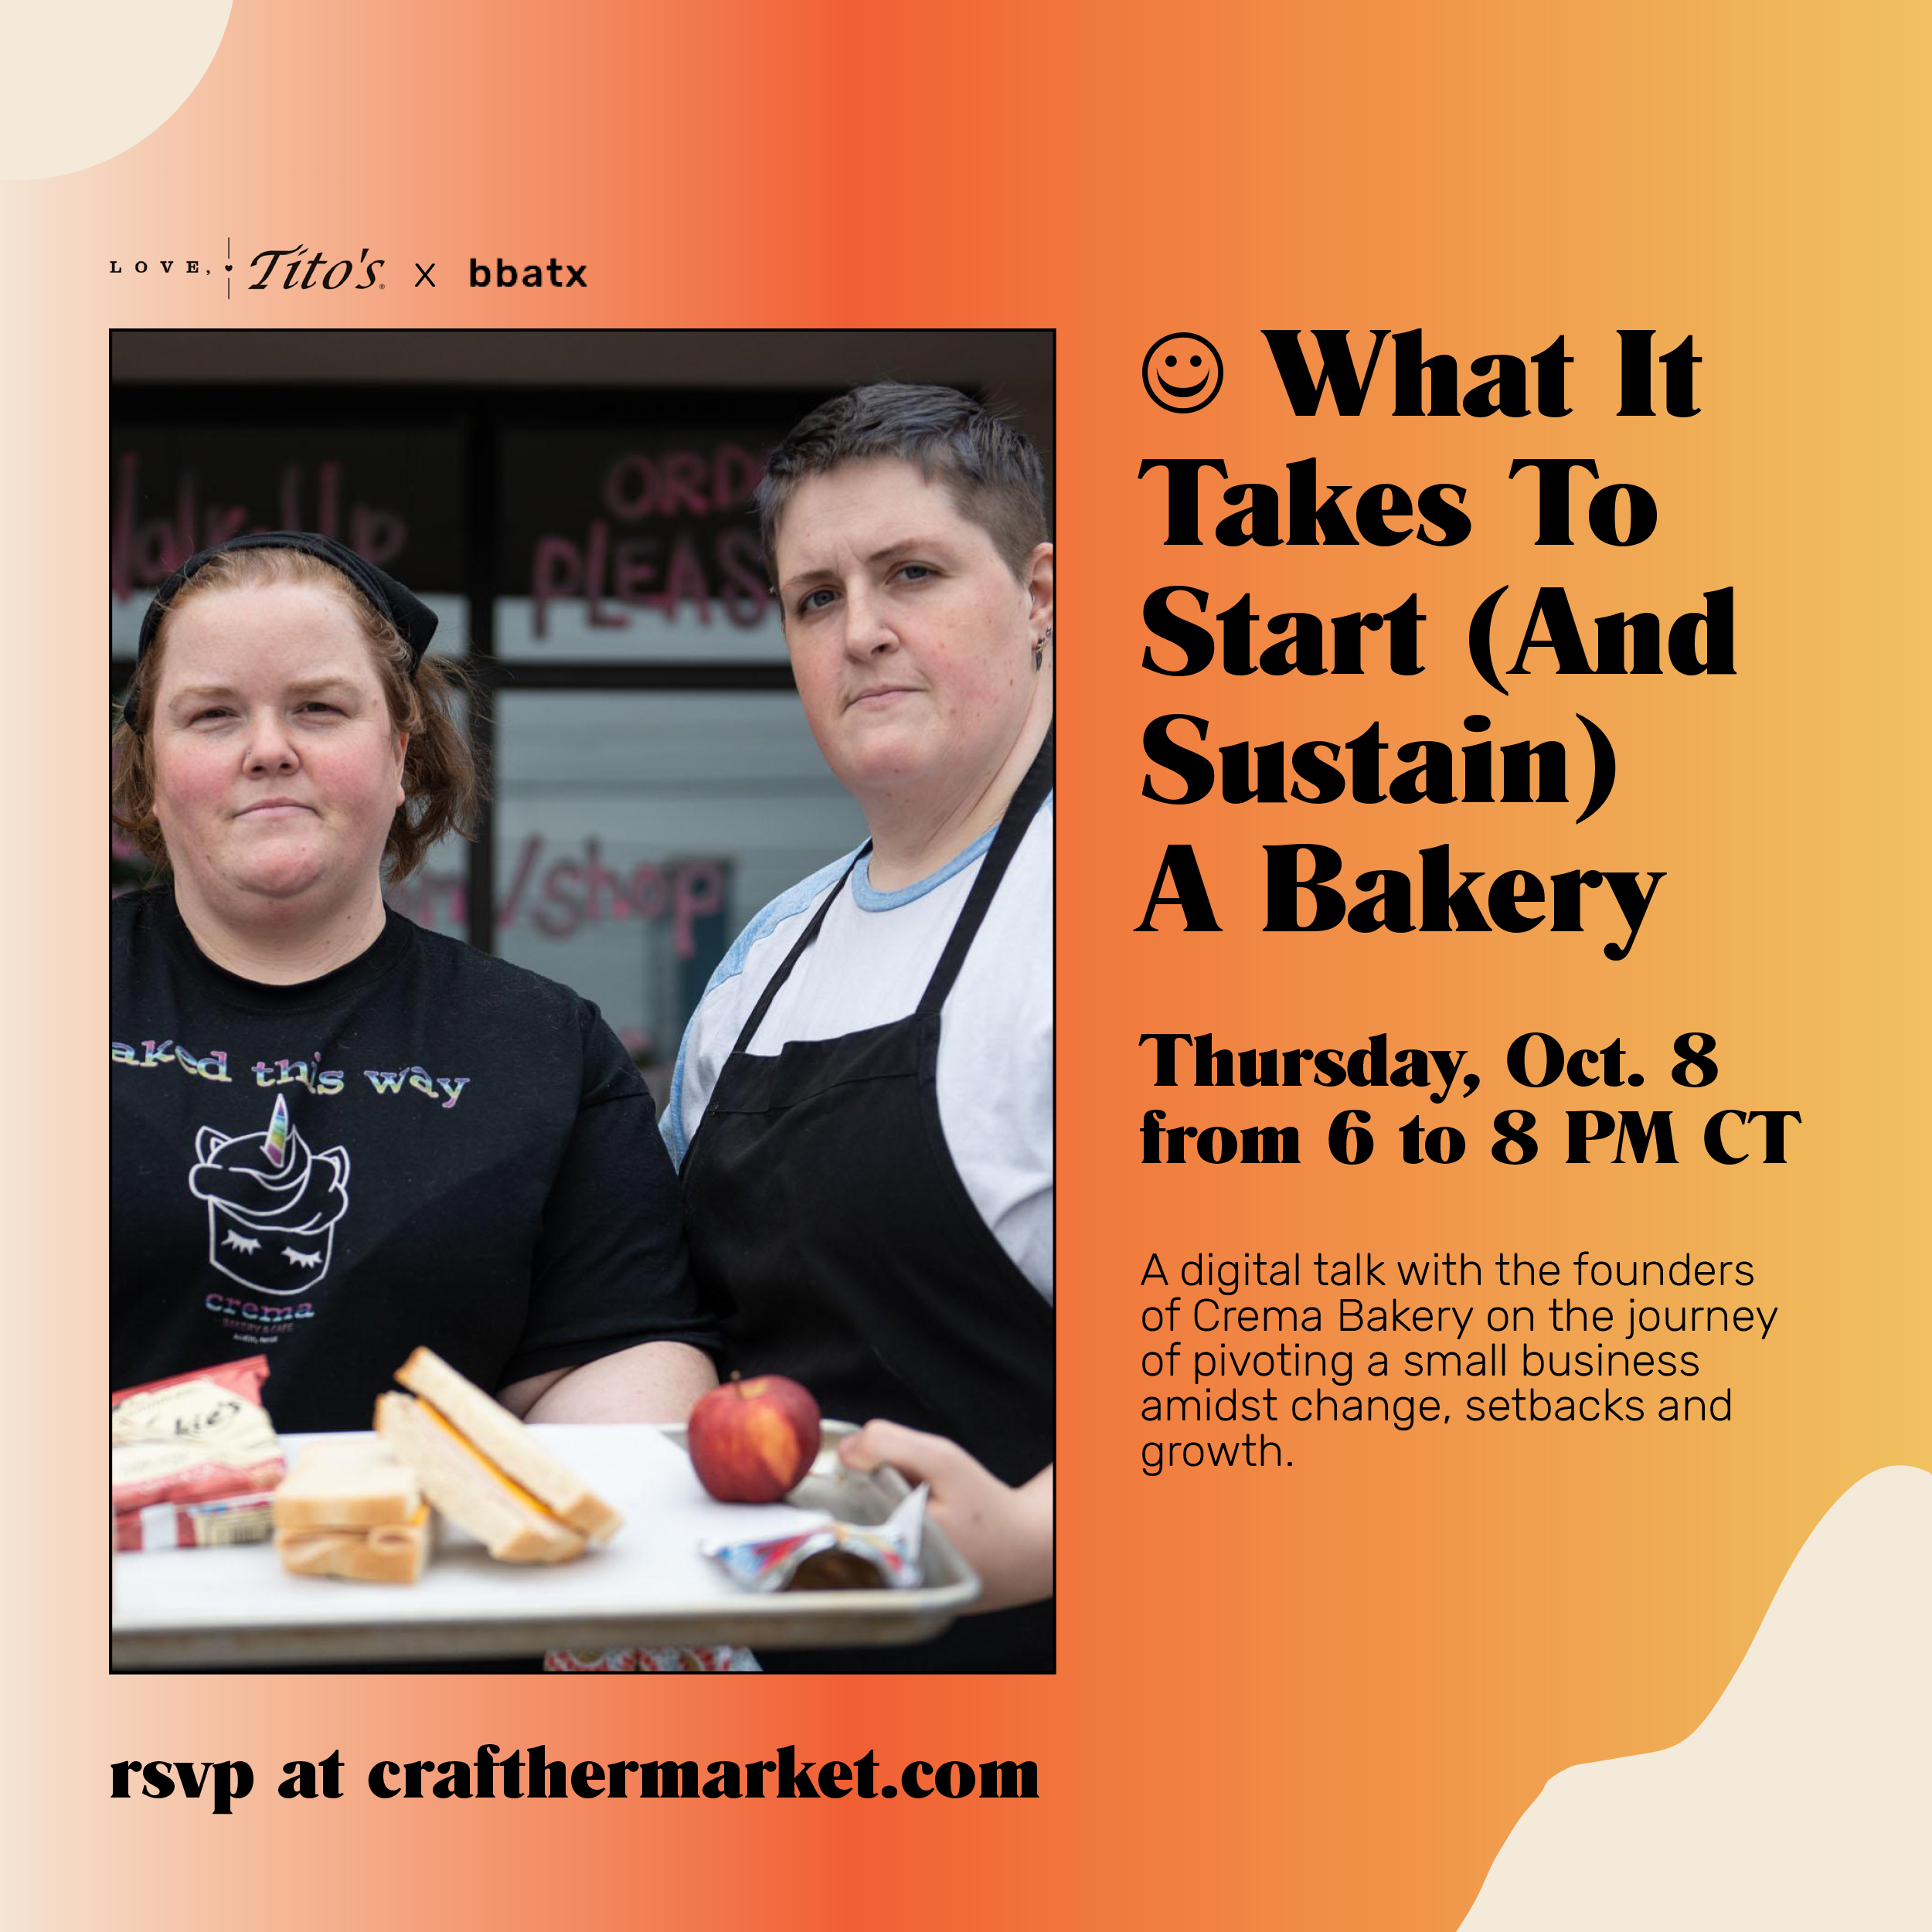 What It Takes To Start (And Sustain) A Bakery: A Talk With Crema Bakery